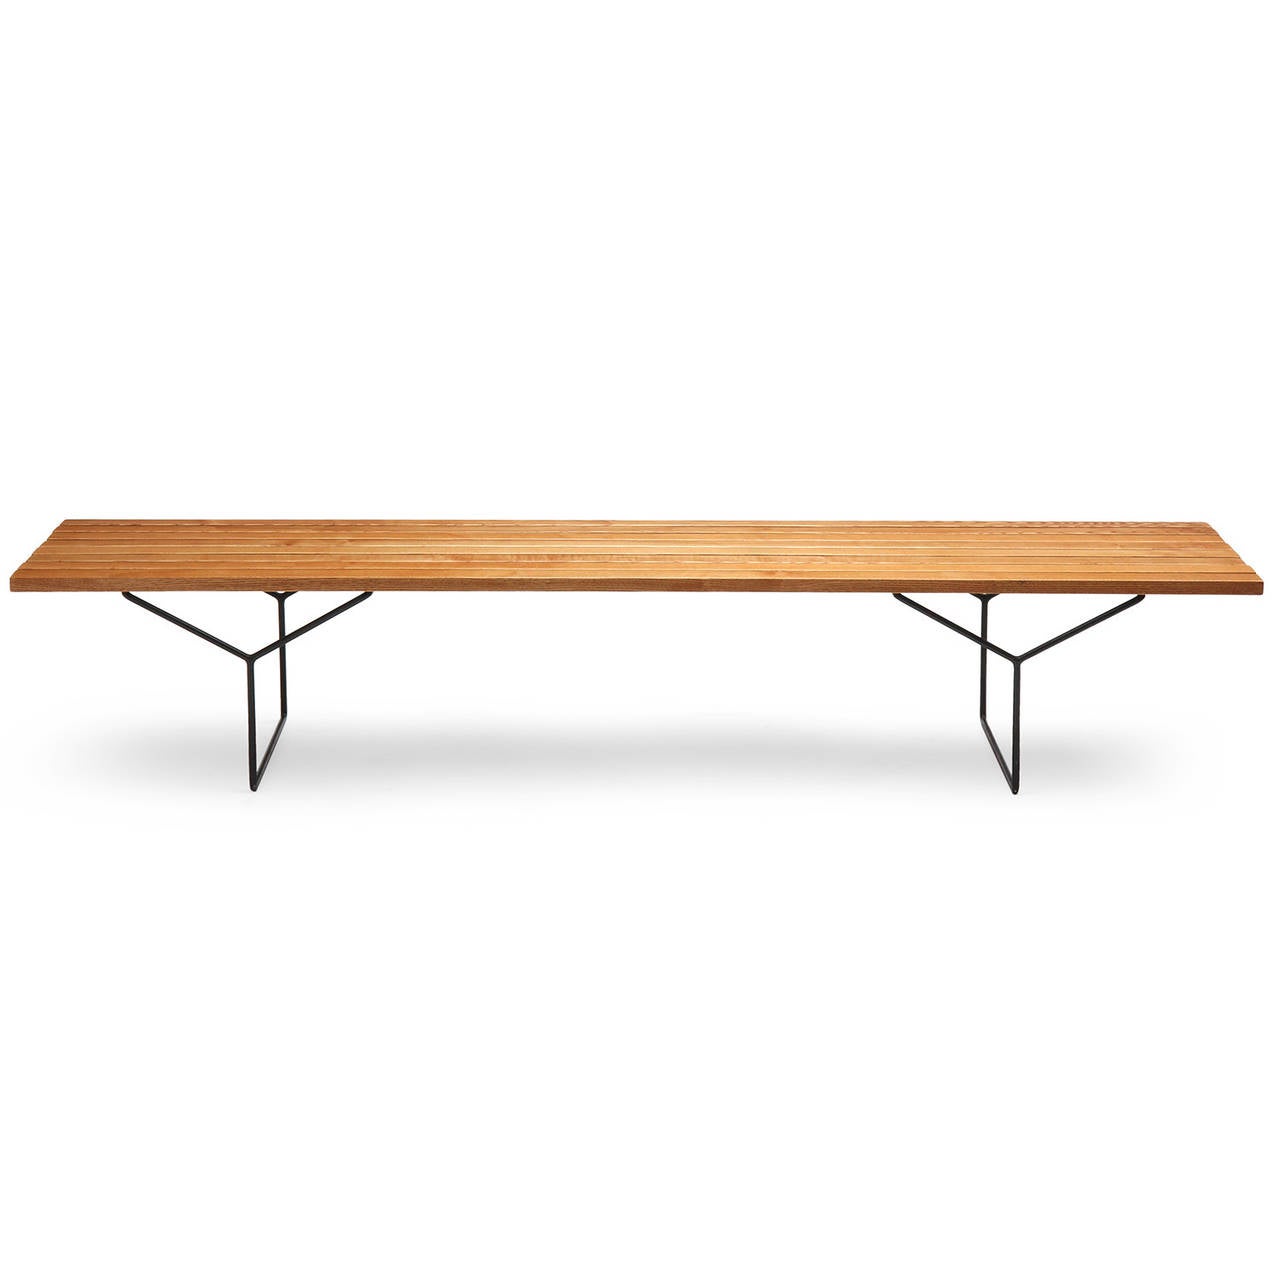 A bench or low table having an architectural blackened iron base with Y-shaped legs supporting a floating top of honey-toned parallel slats of figured white oak.